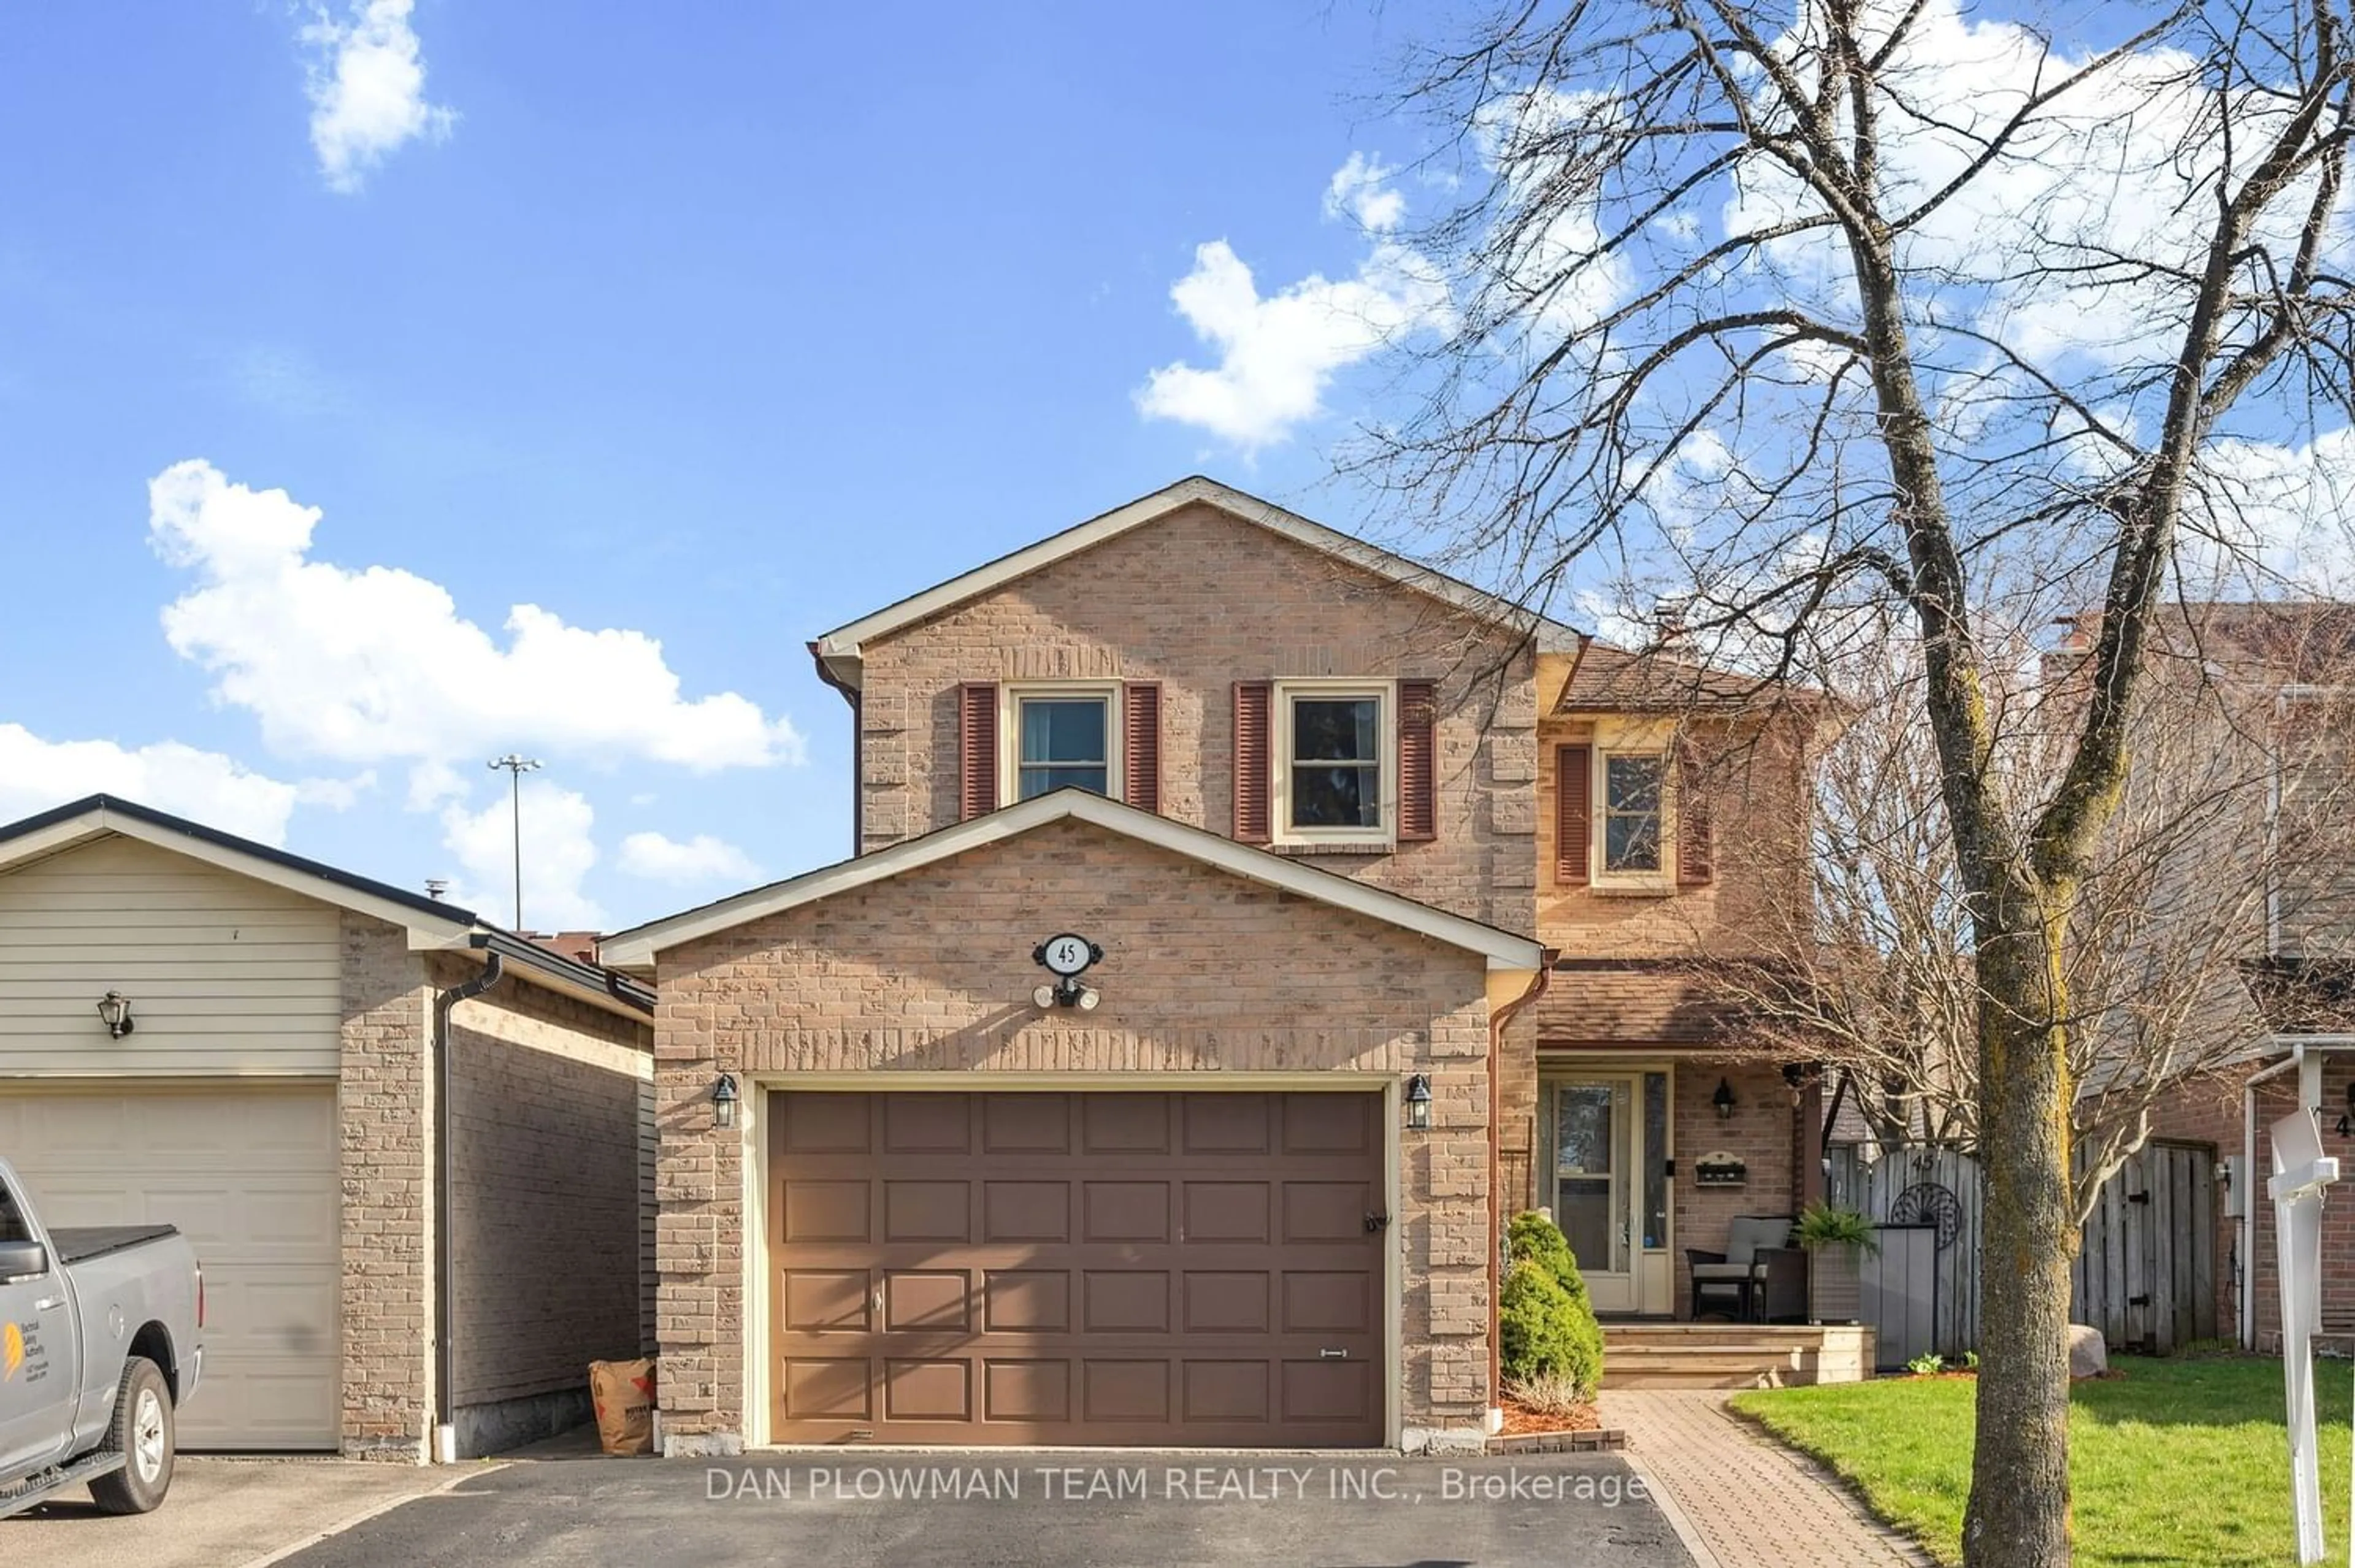 Home with brick exterior material for 45 Dobson Dr, Ajax Ontario L1S 5G4